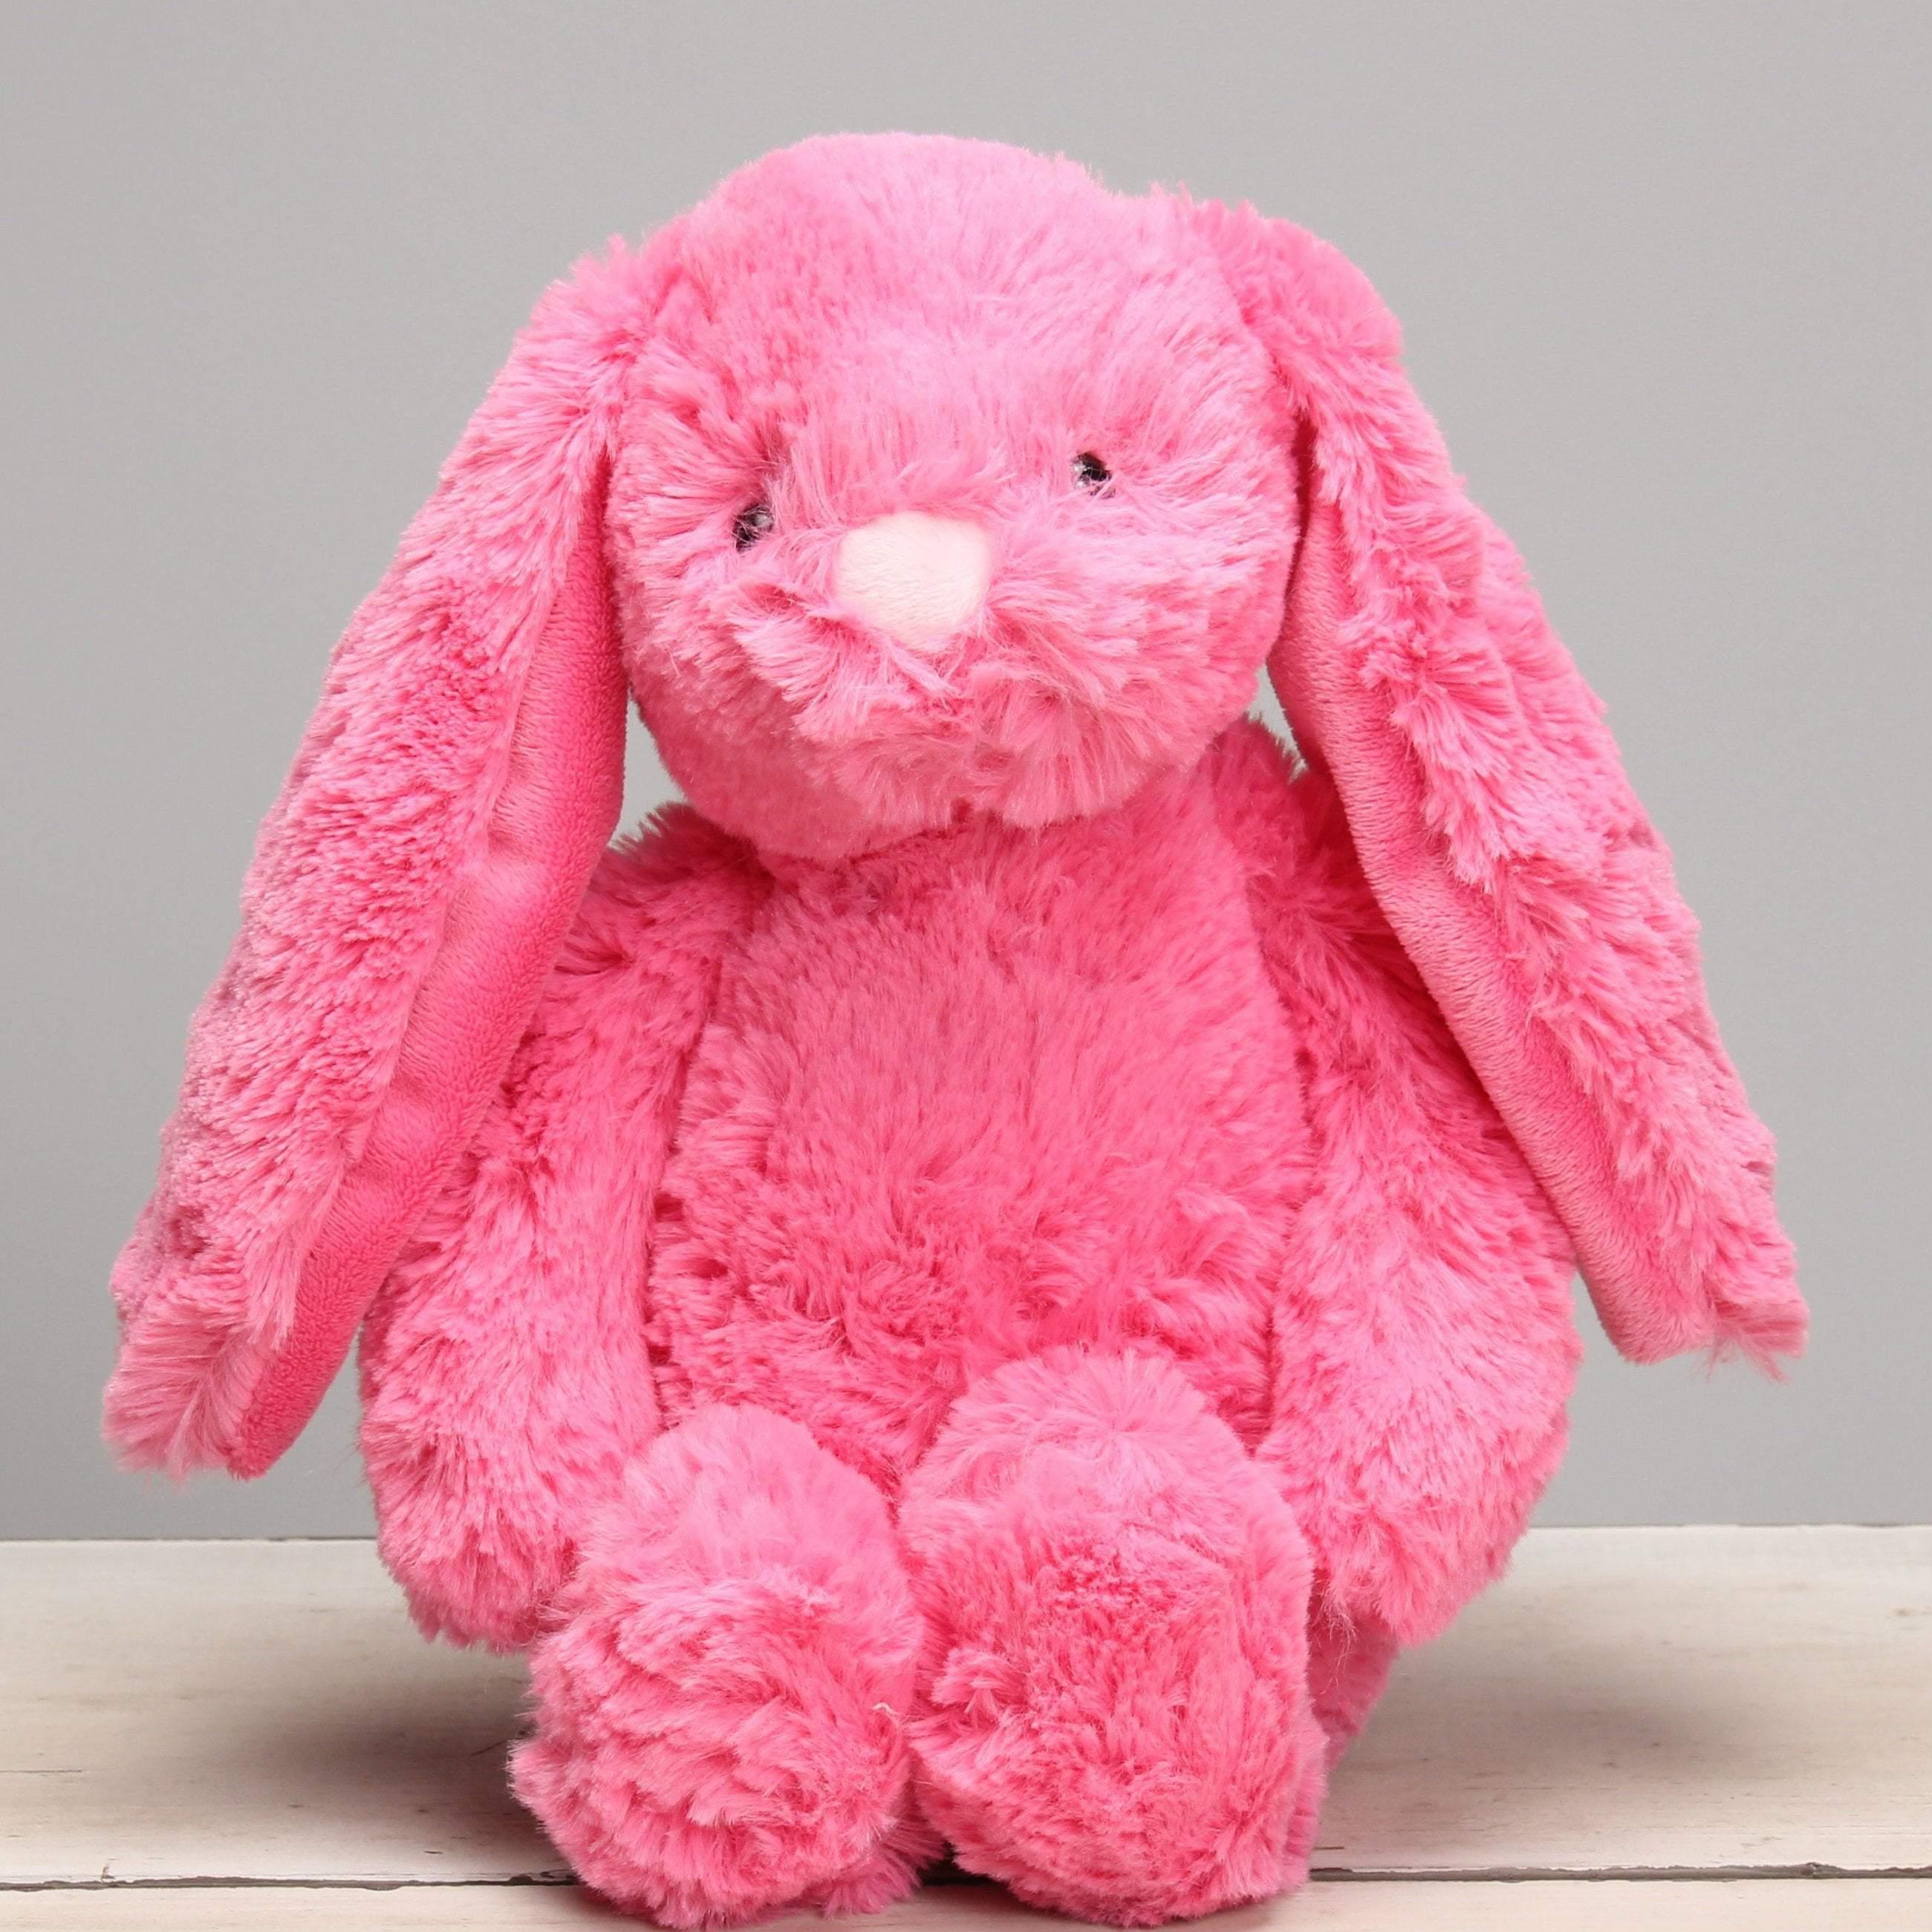 Gitzy FIGURINE Gitzy Dark Pink Easter Bunny Stuffed Animal for Kids - Easter and Springtime Decorations - Colorful Plush Bunny with Floppy Ears - 9 Inches Tall